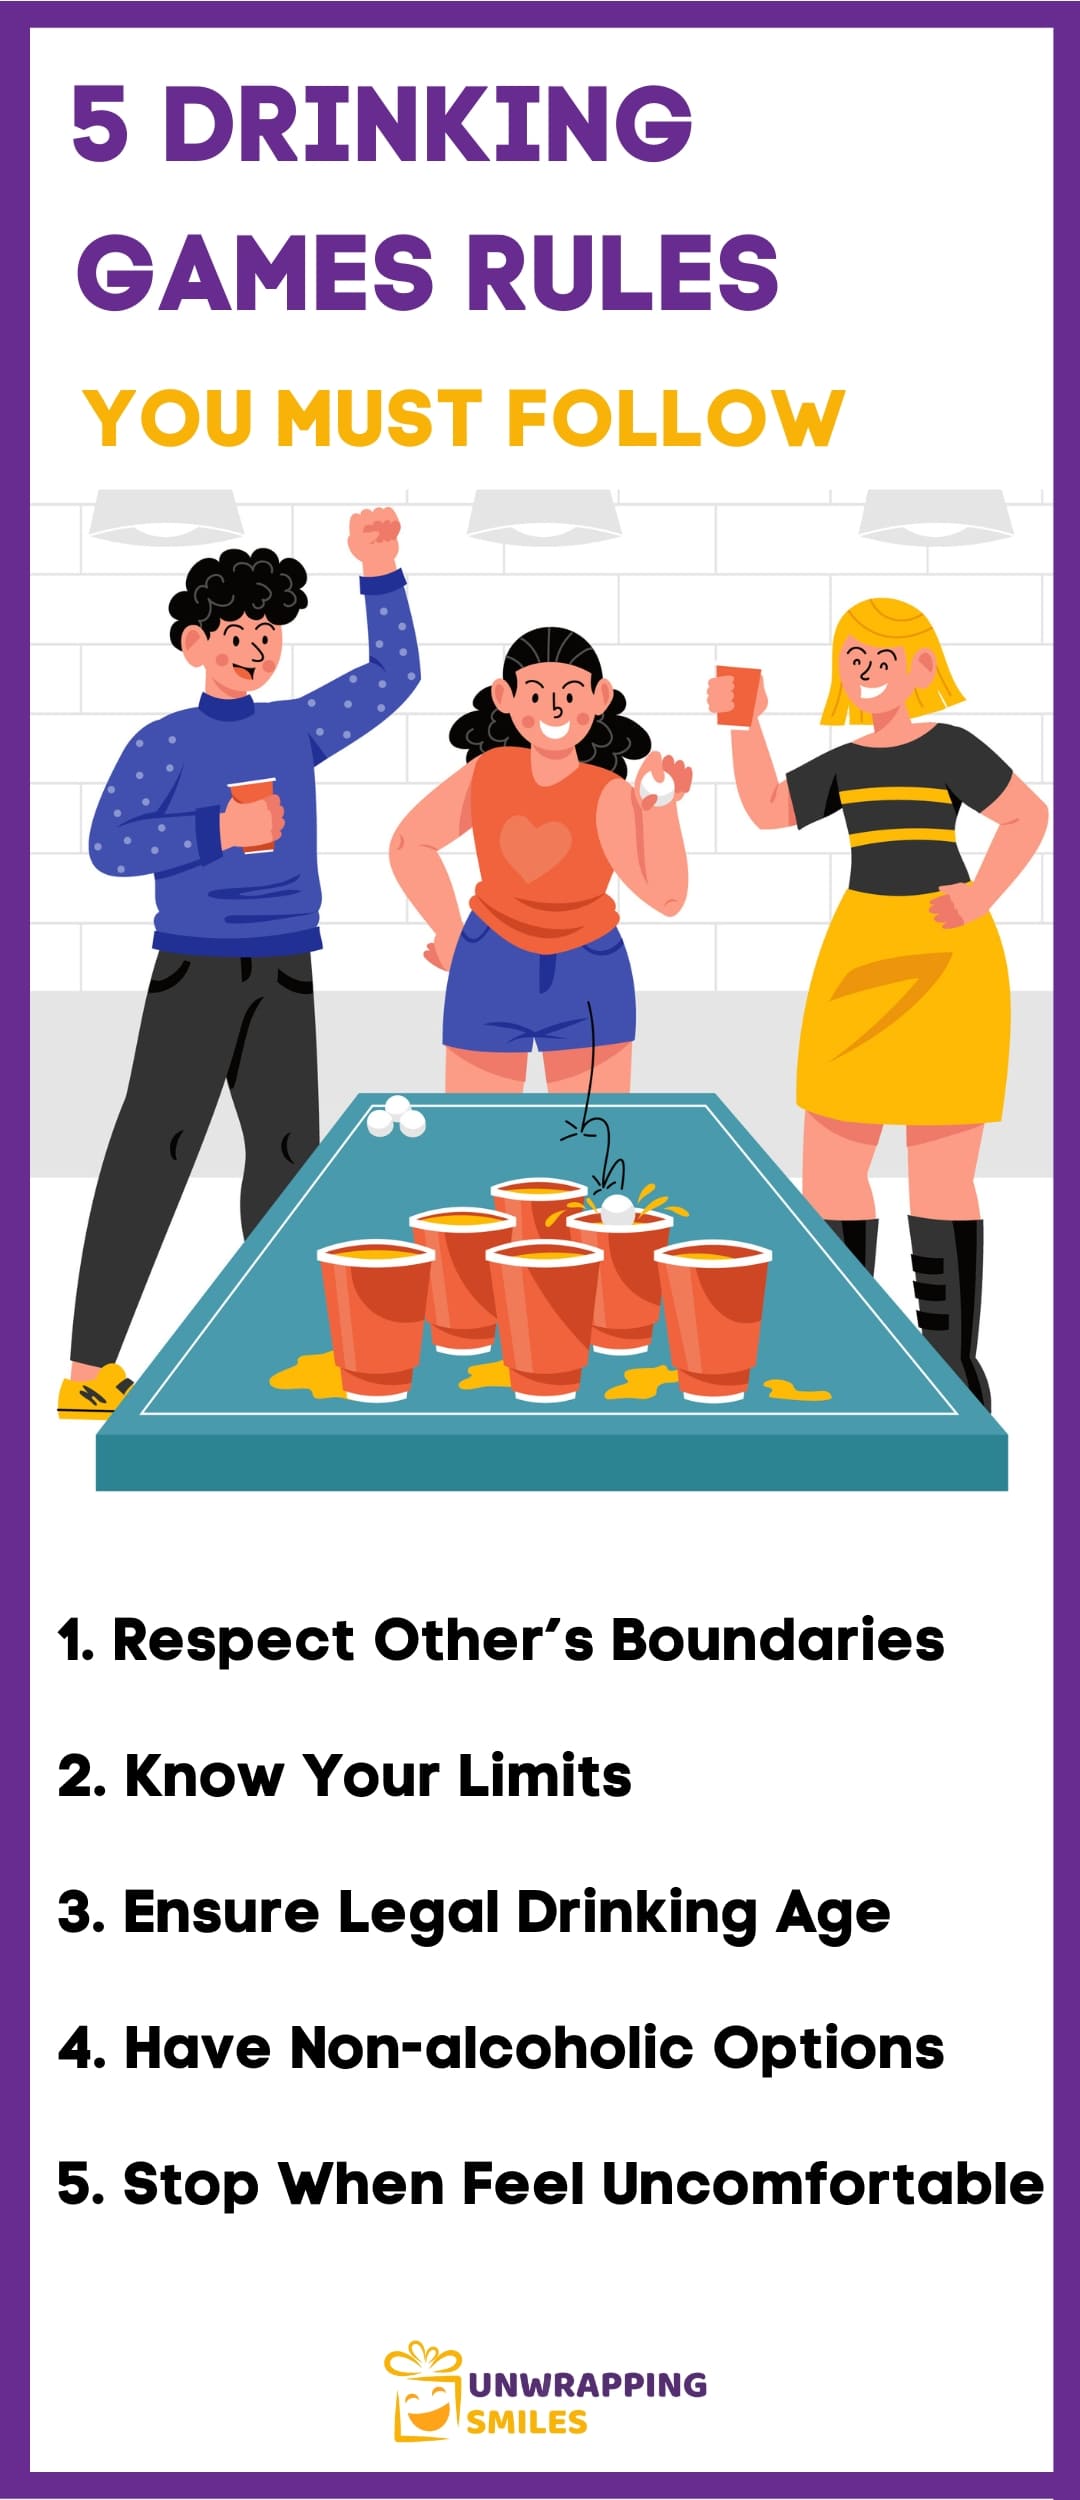 5 Drinking Games Rules